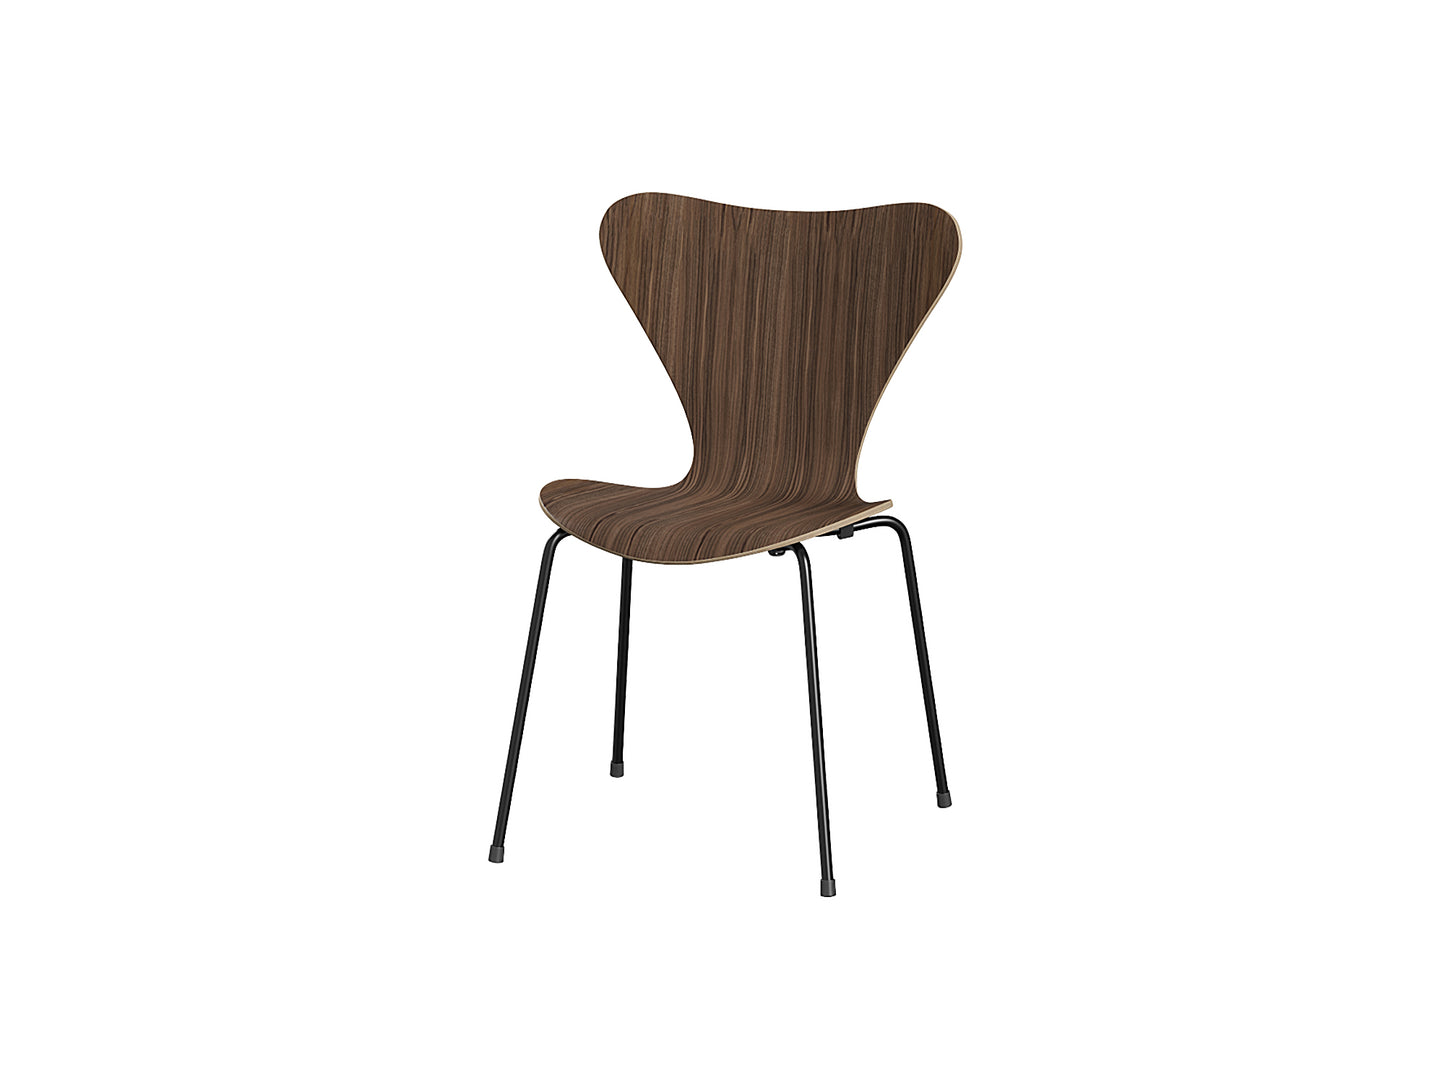 Series 7 Dining Chair (Clear Lacquered Wood) by Fritz Hanse - Walnut / Black Steel